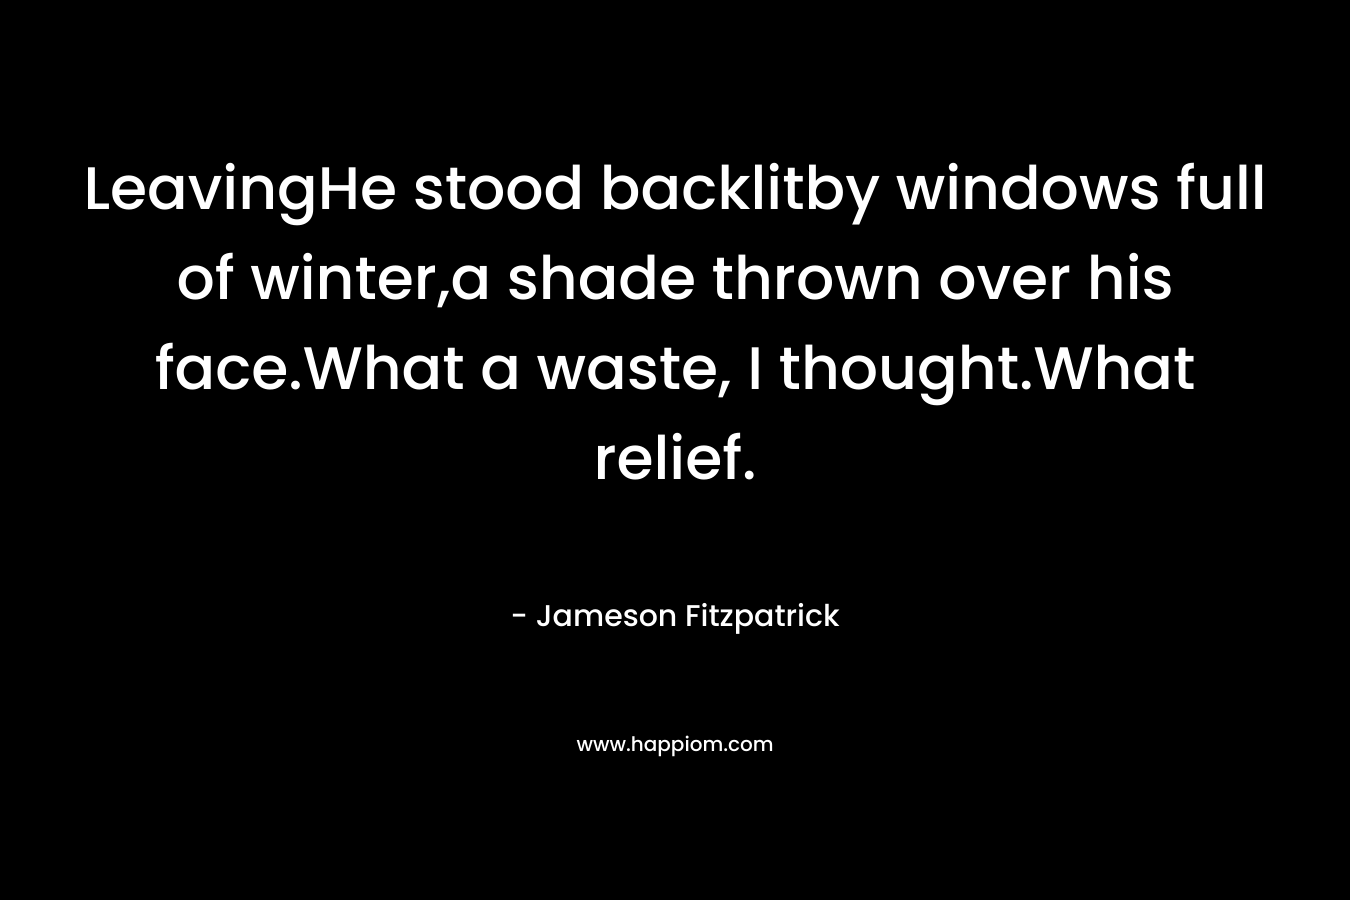 LeavingHe stood backlitby windows full of winter,a shade thrown over his face.What a waste, I thought.What relief. – Jameson Fitzpatrick